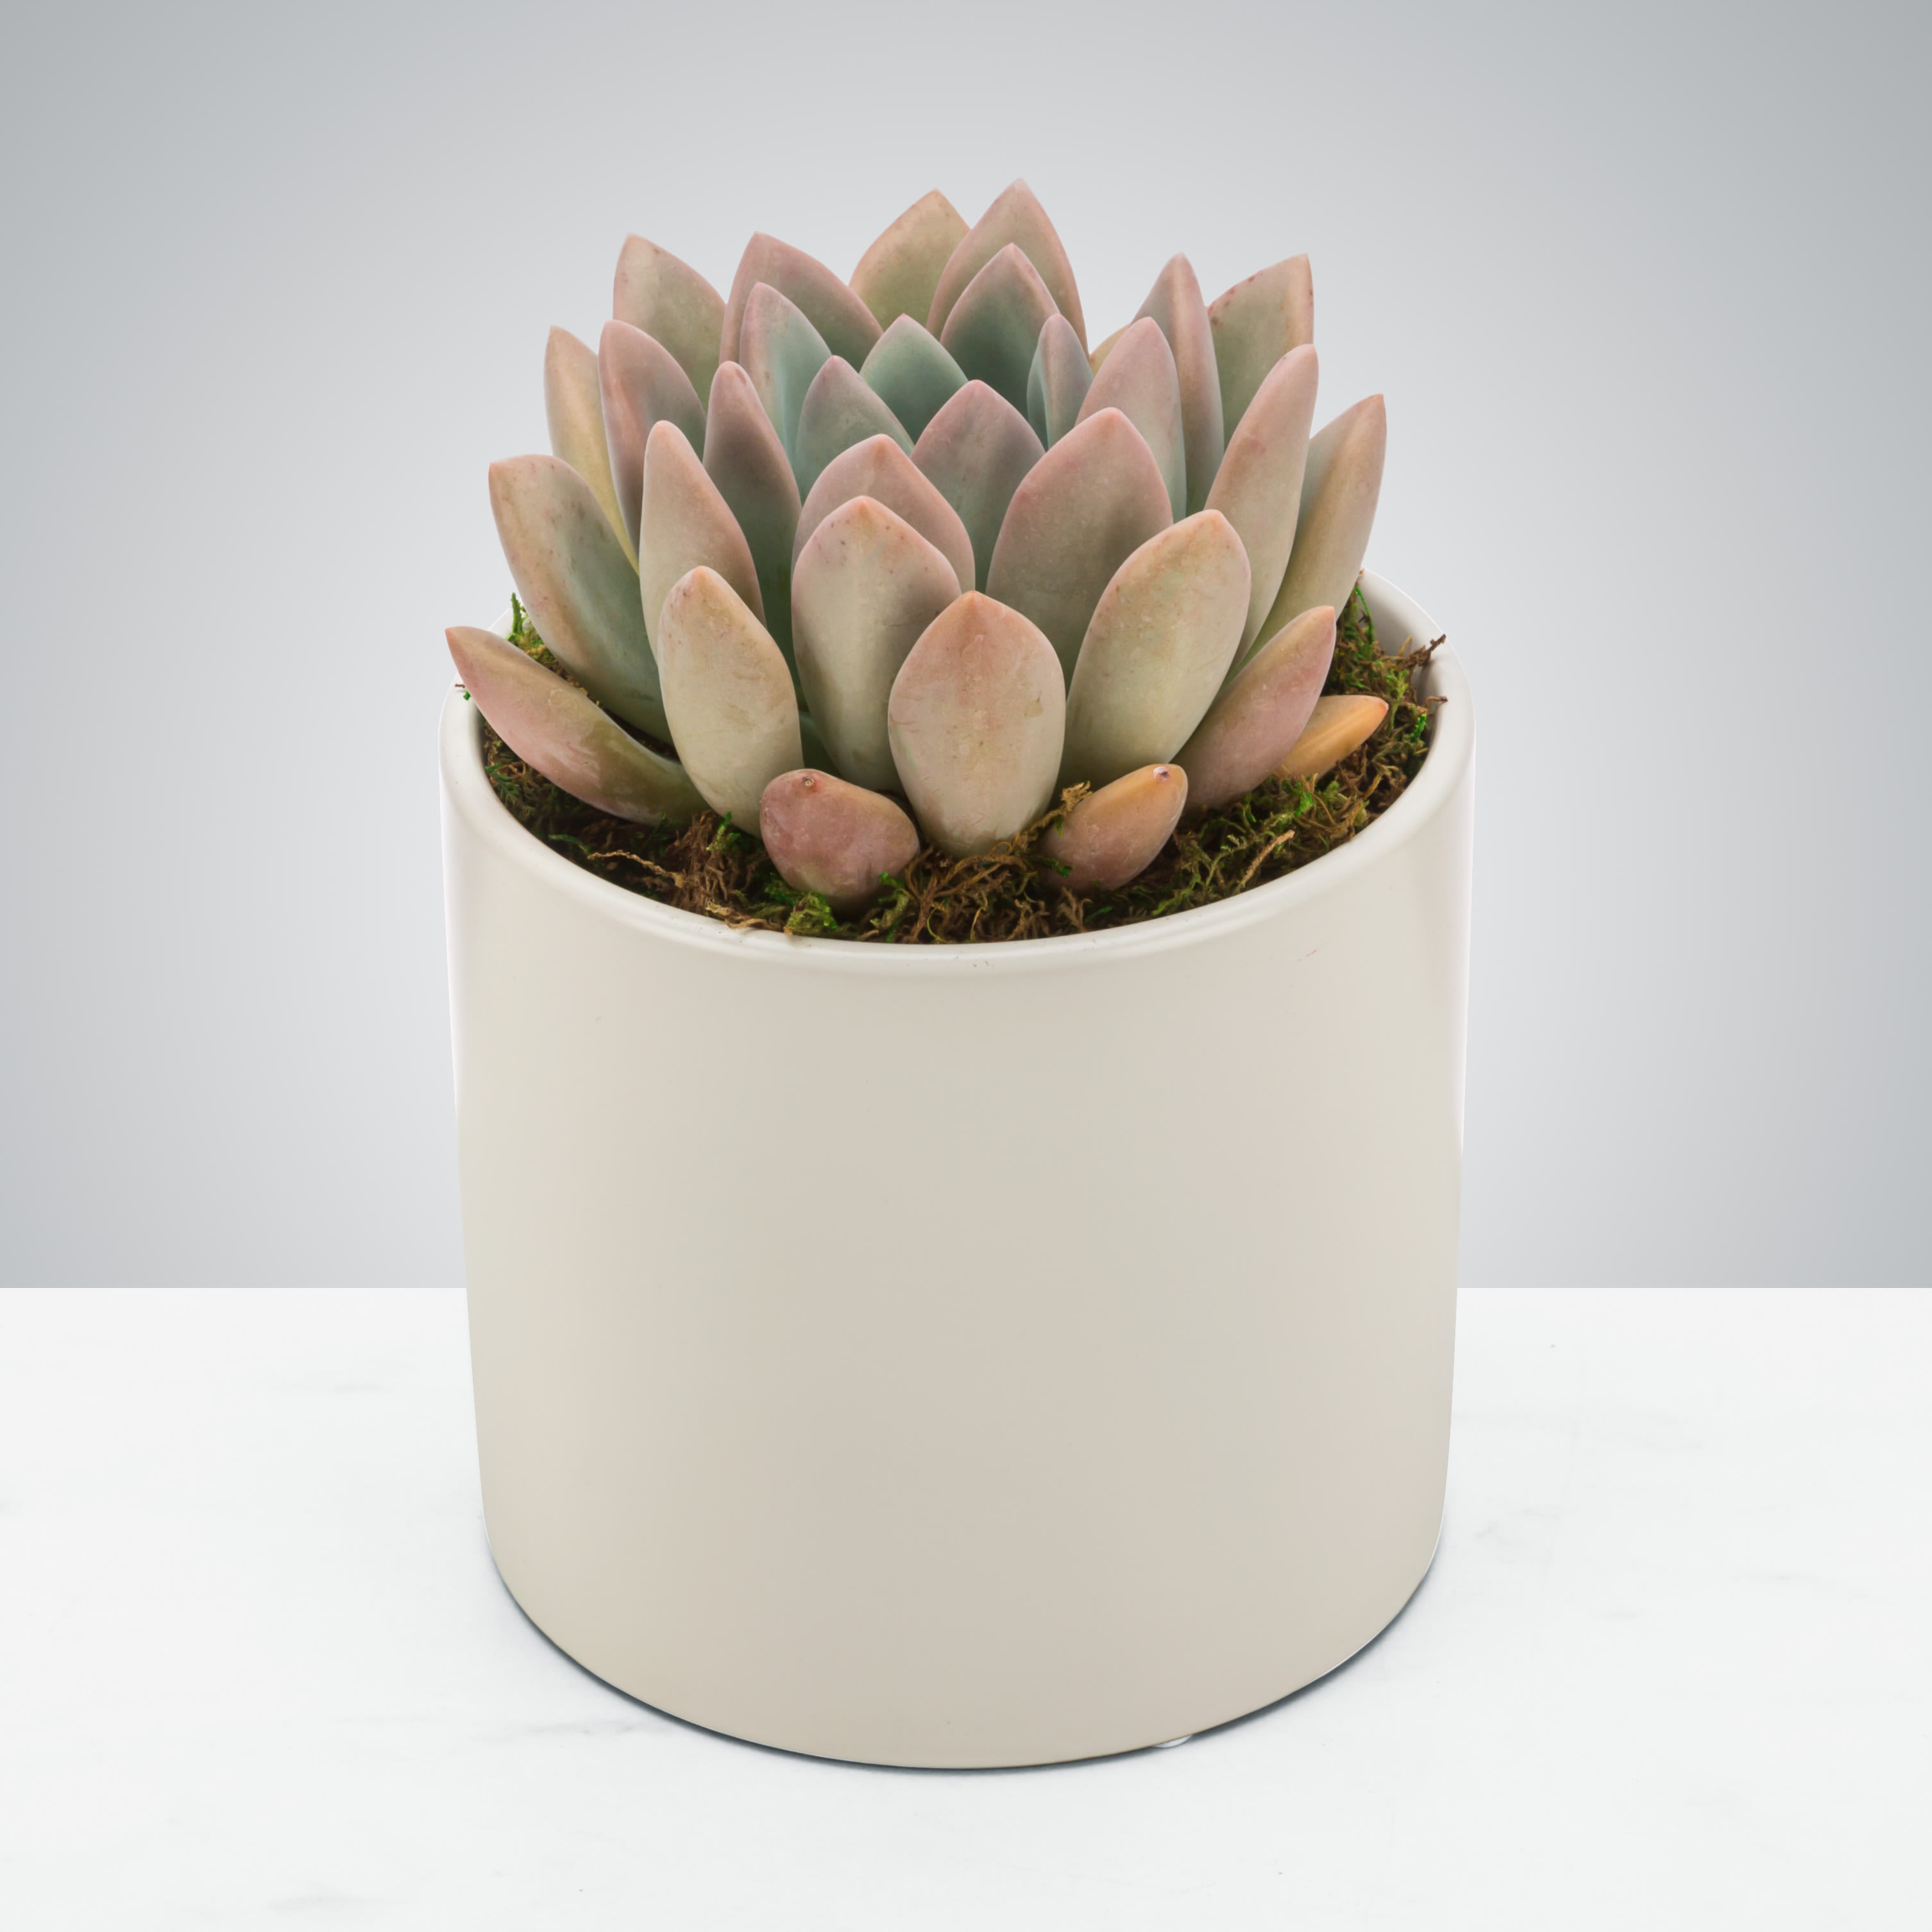 So-cute-lent by BloomNation™ - Everybody loves succulents! Send this hardy little plant to celebrate promotions, new jobs, or birthdays. It can be enjoyed for years if you treat it right! Vase and succulent variety can vary based on availability.